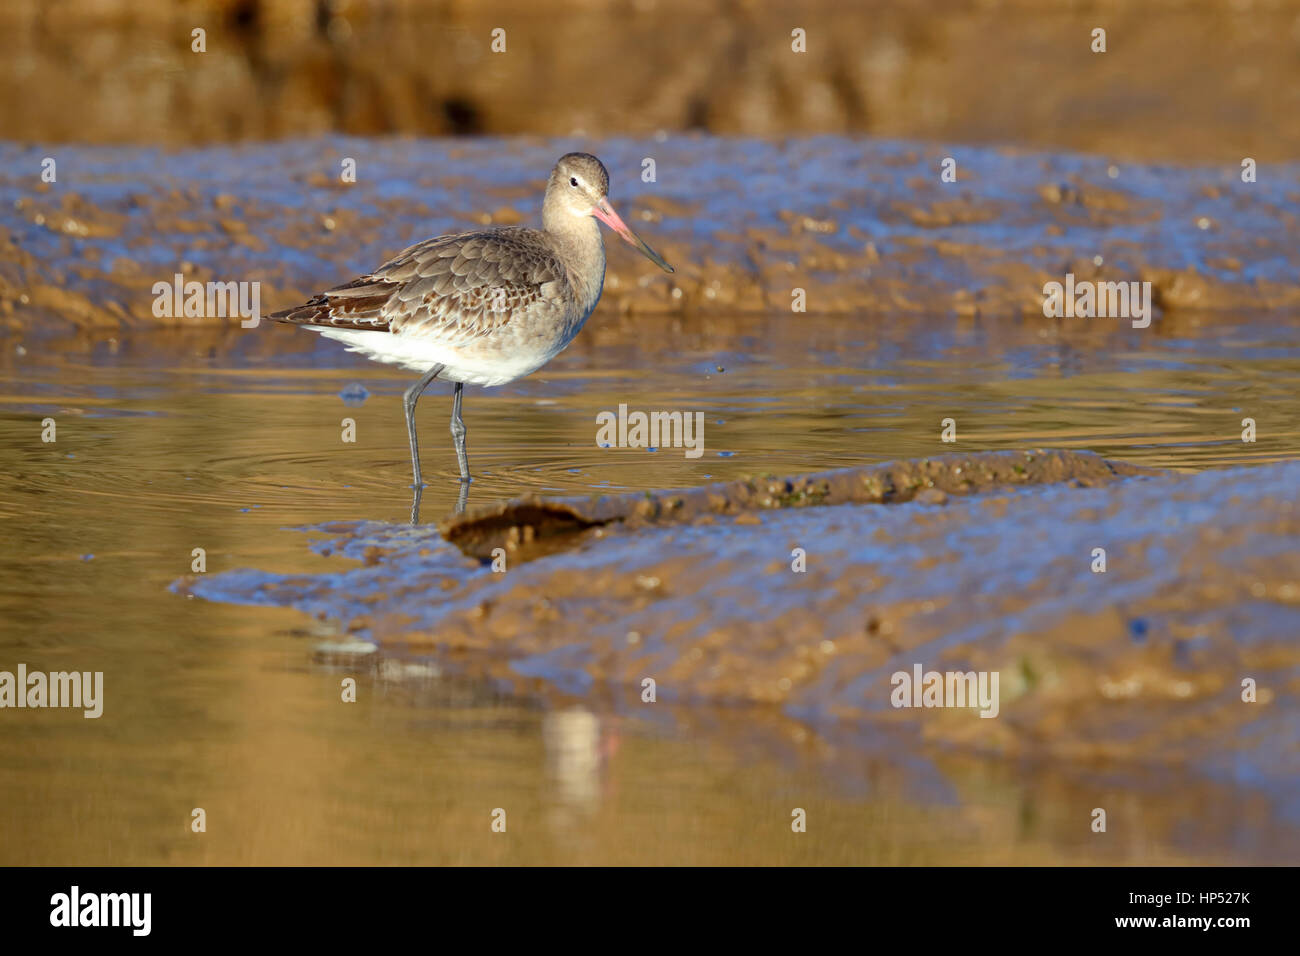 A winter / non-breeding plumage Black-tailed Godwit Limosa limosa on a Norfolk estuary in winter Stock Photo